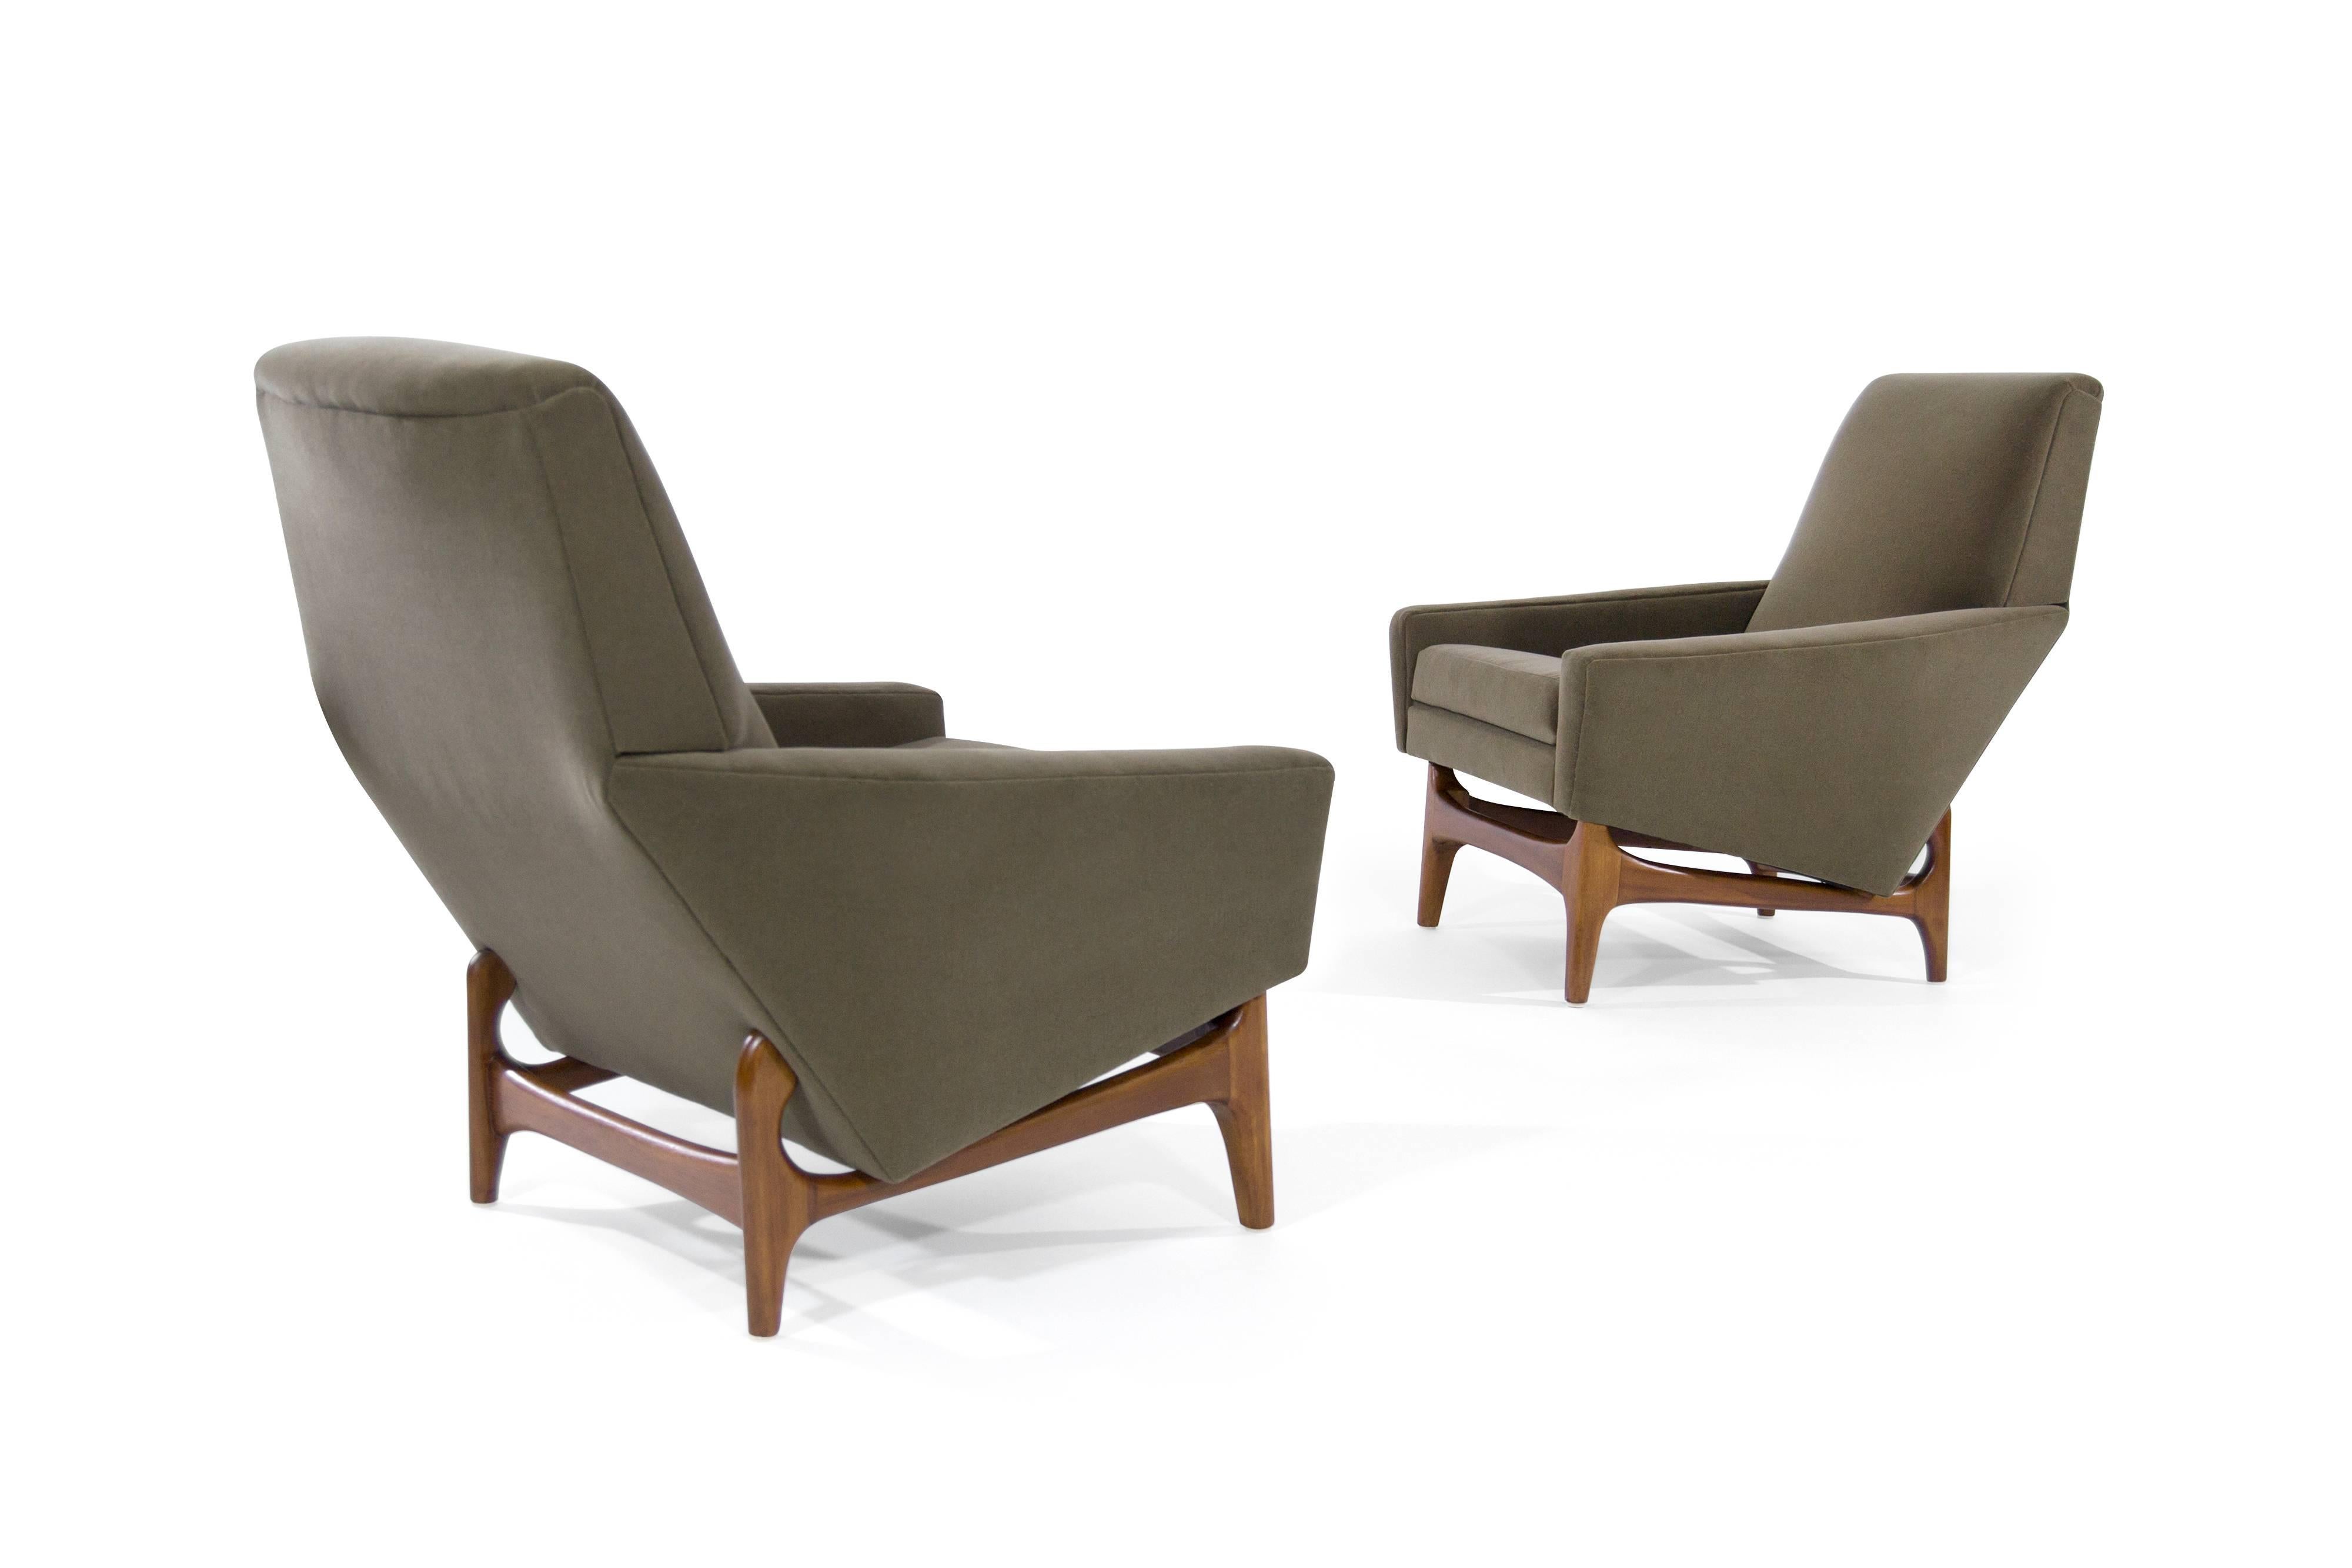 Handsome pair of Danish-Modern lounge chairs, newly recovered in olive velvet. Sculptural teak bases fully restored.